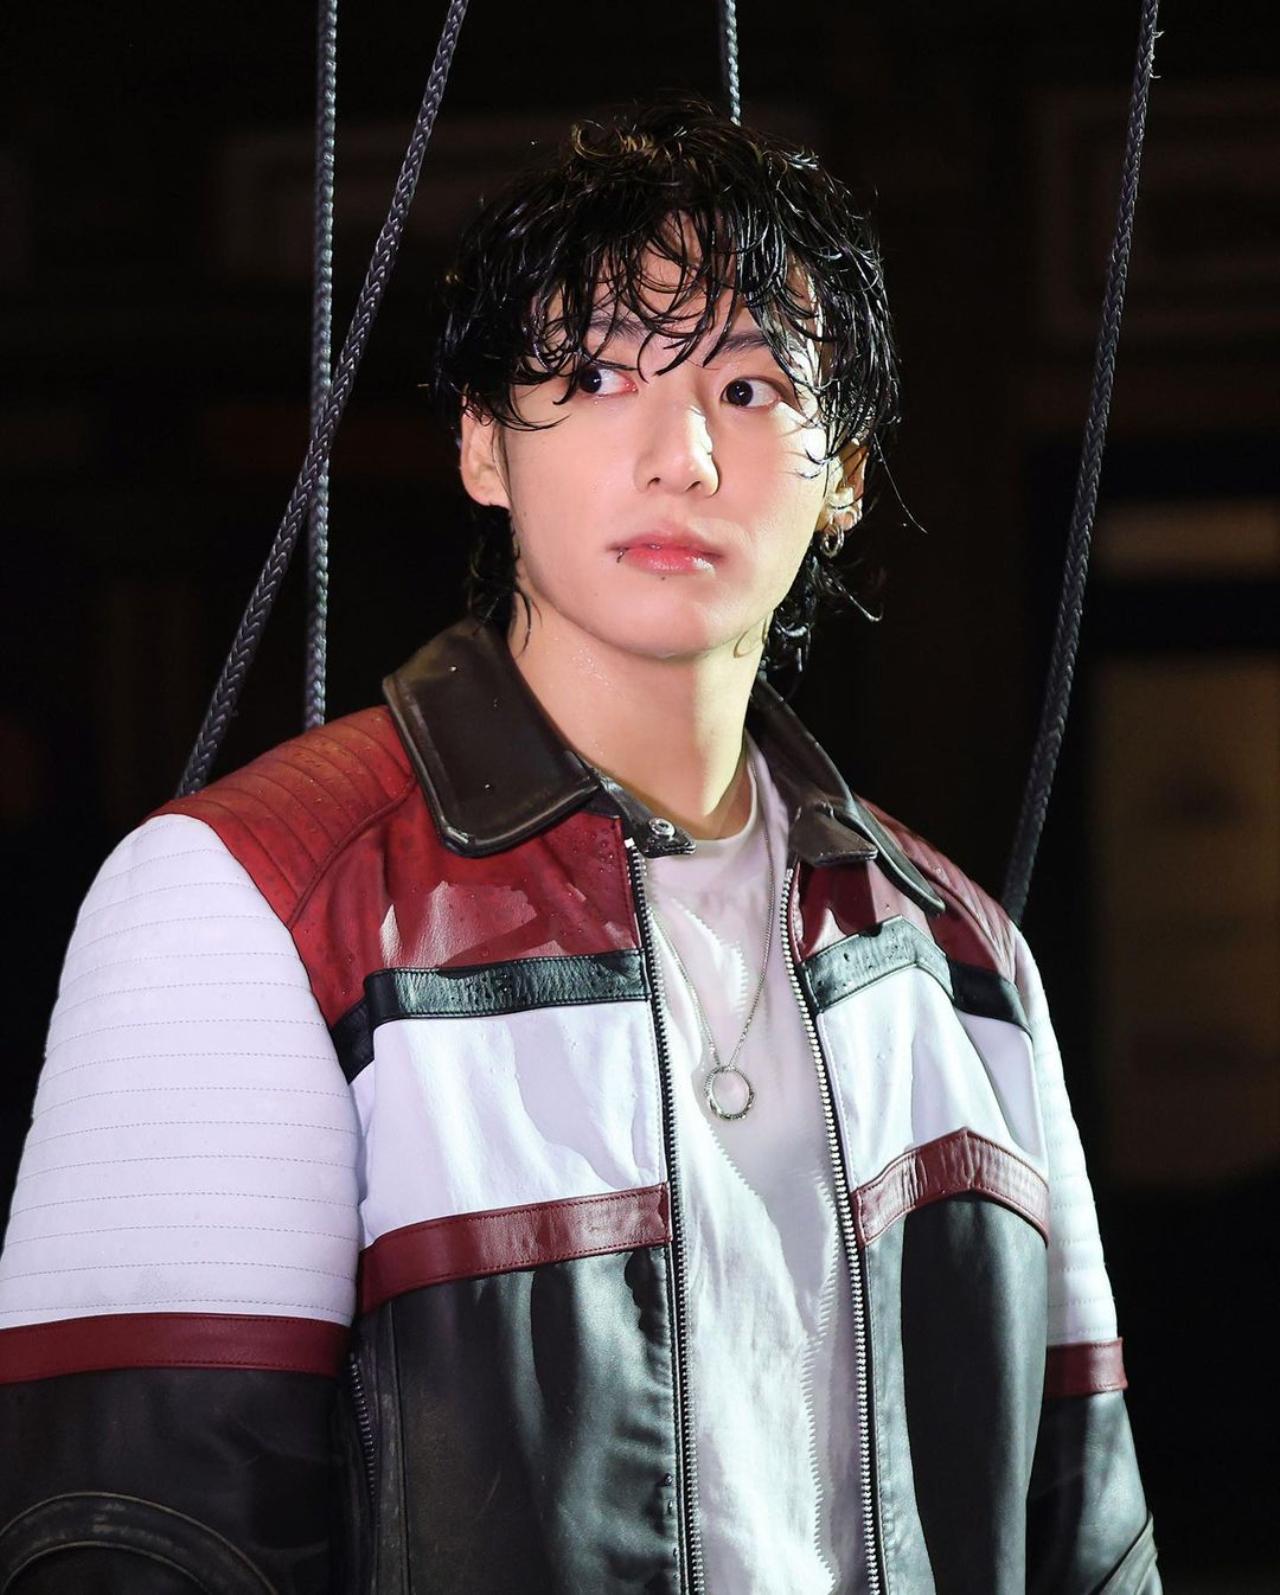 In Pics: BTS’s Jungkook is ever the charming hero in ’Seven’ MV Photo ...